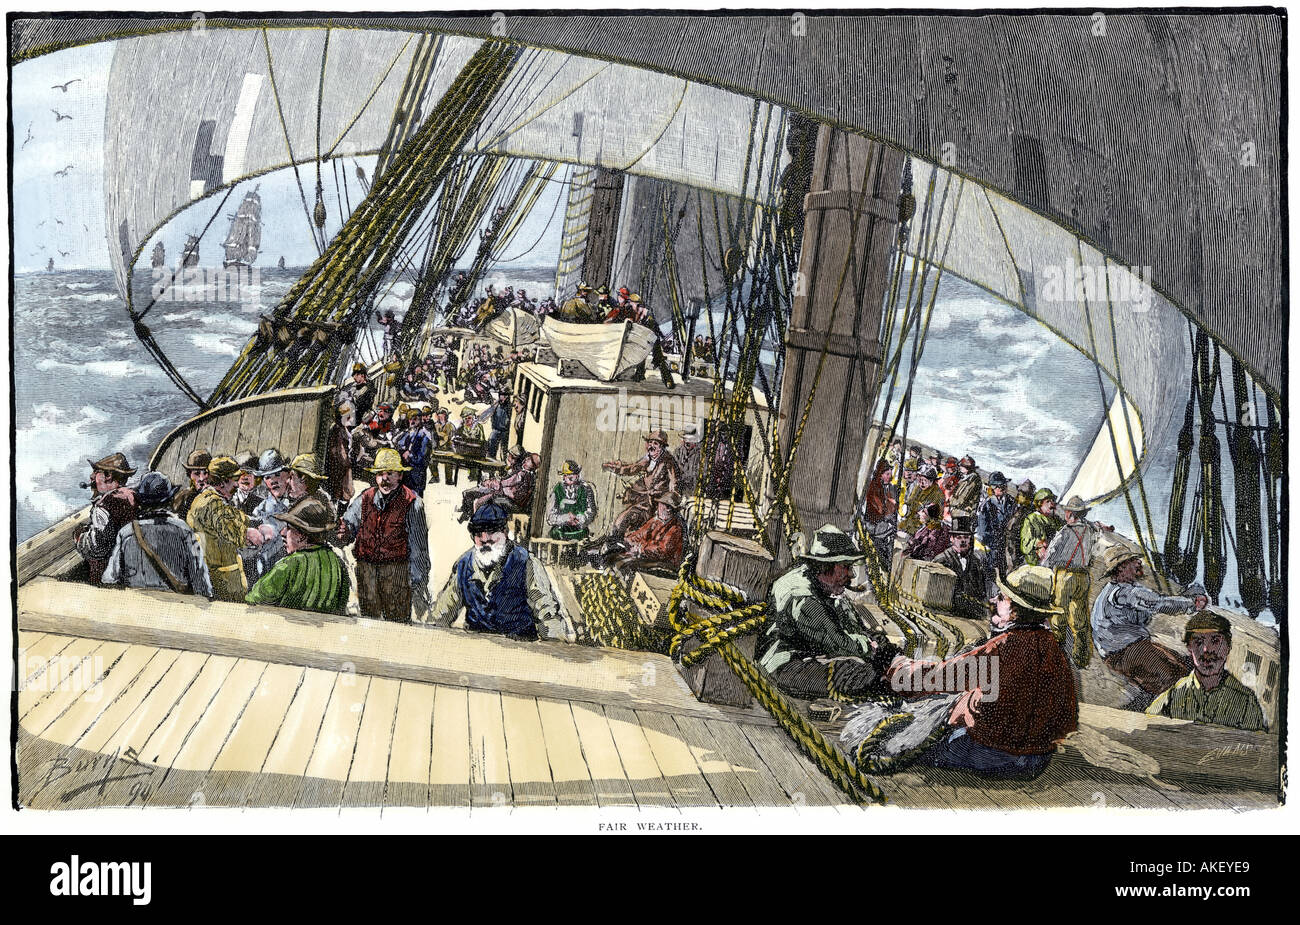 Gold seekers en route to the California Gold Rush on a clipper ship in fair weather 1849 or 1850. Hand-colored woodcut Stock Photo